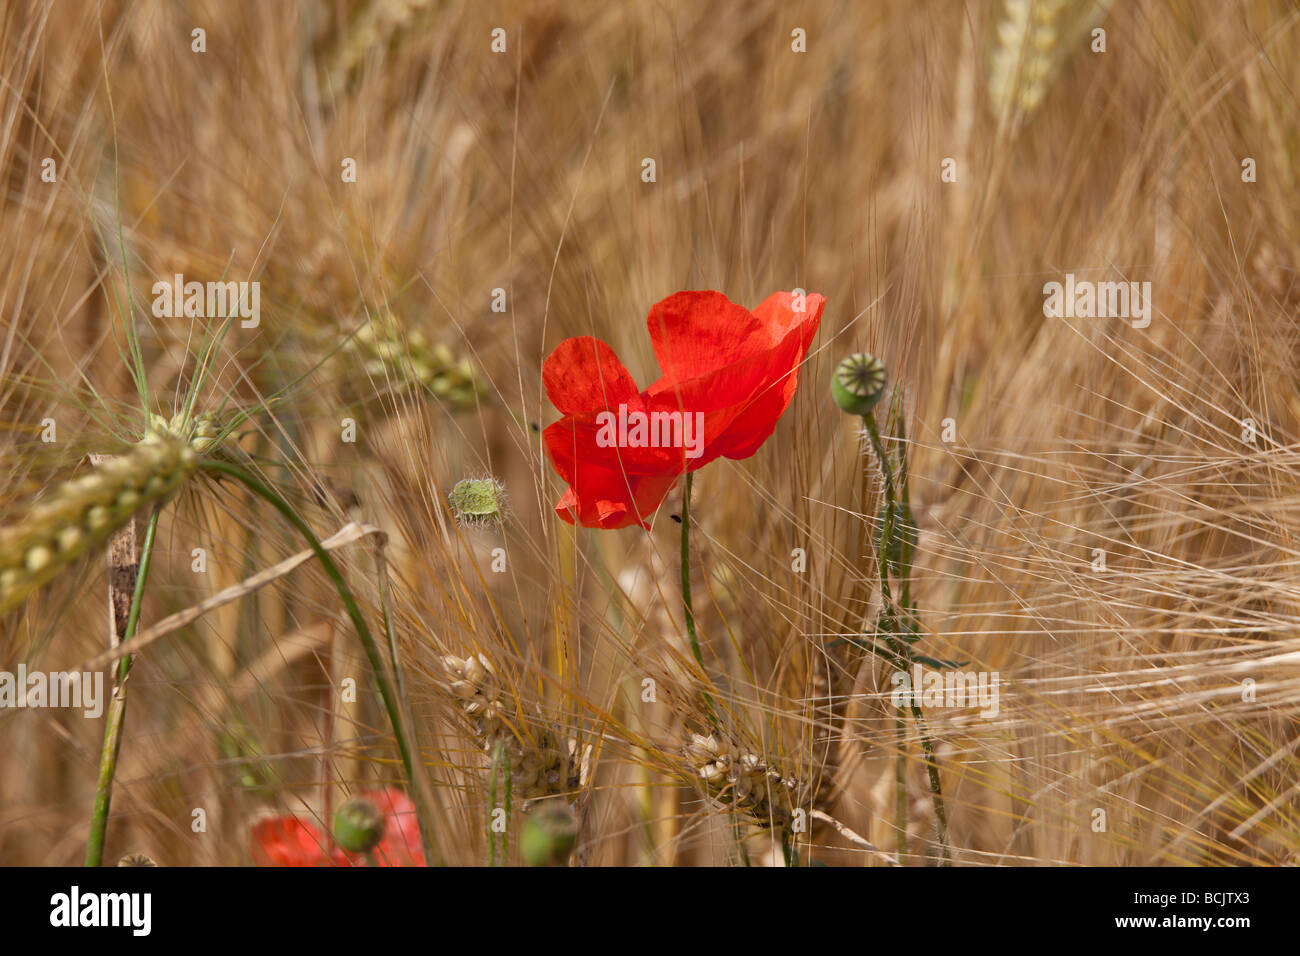 Papaver rhoeas Papaveraceae in a field of wheat, by Charles W. Lupica. Stock Photo